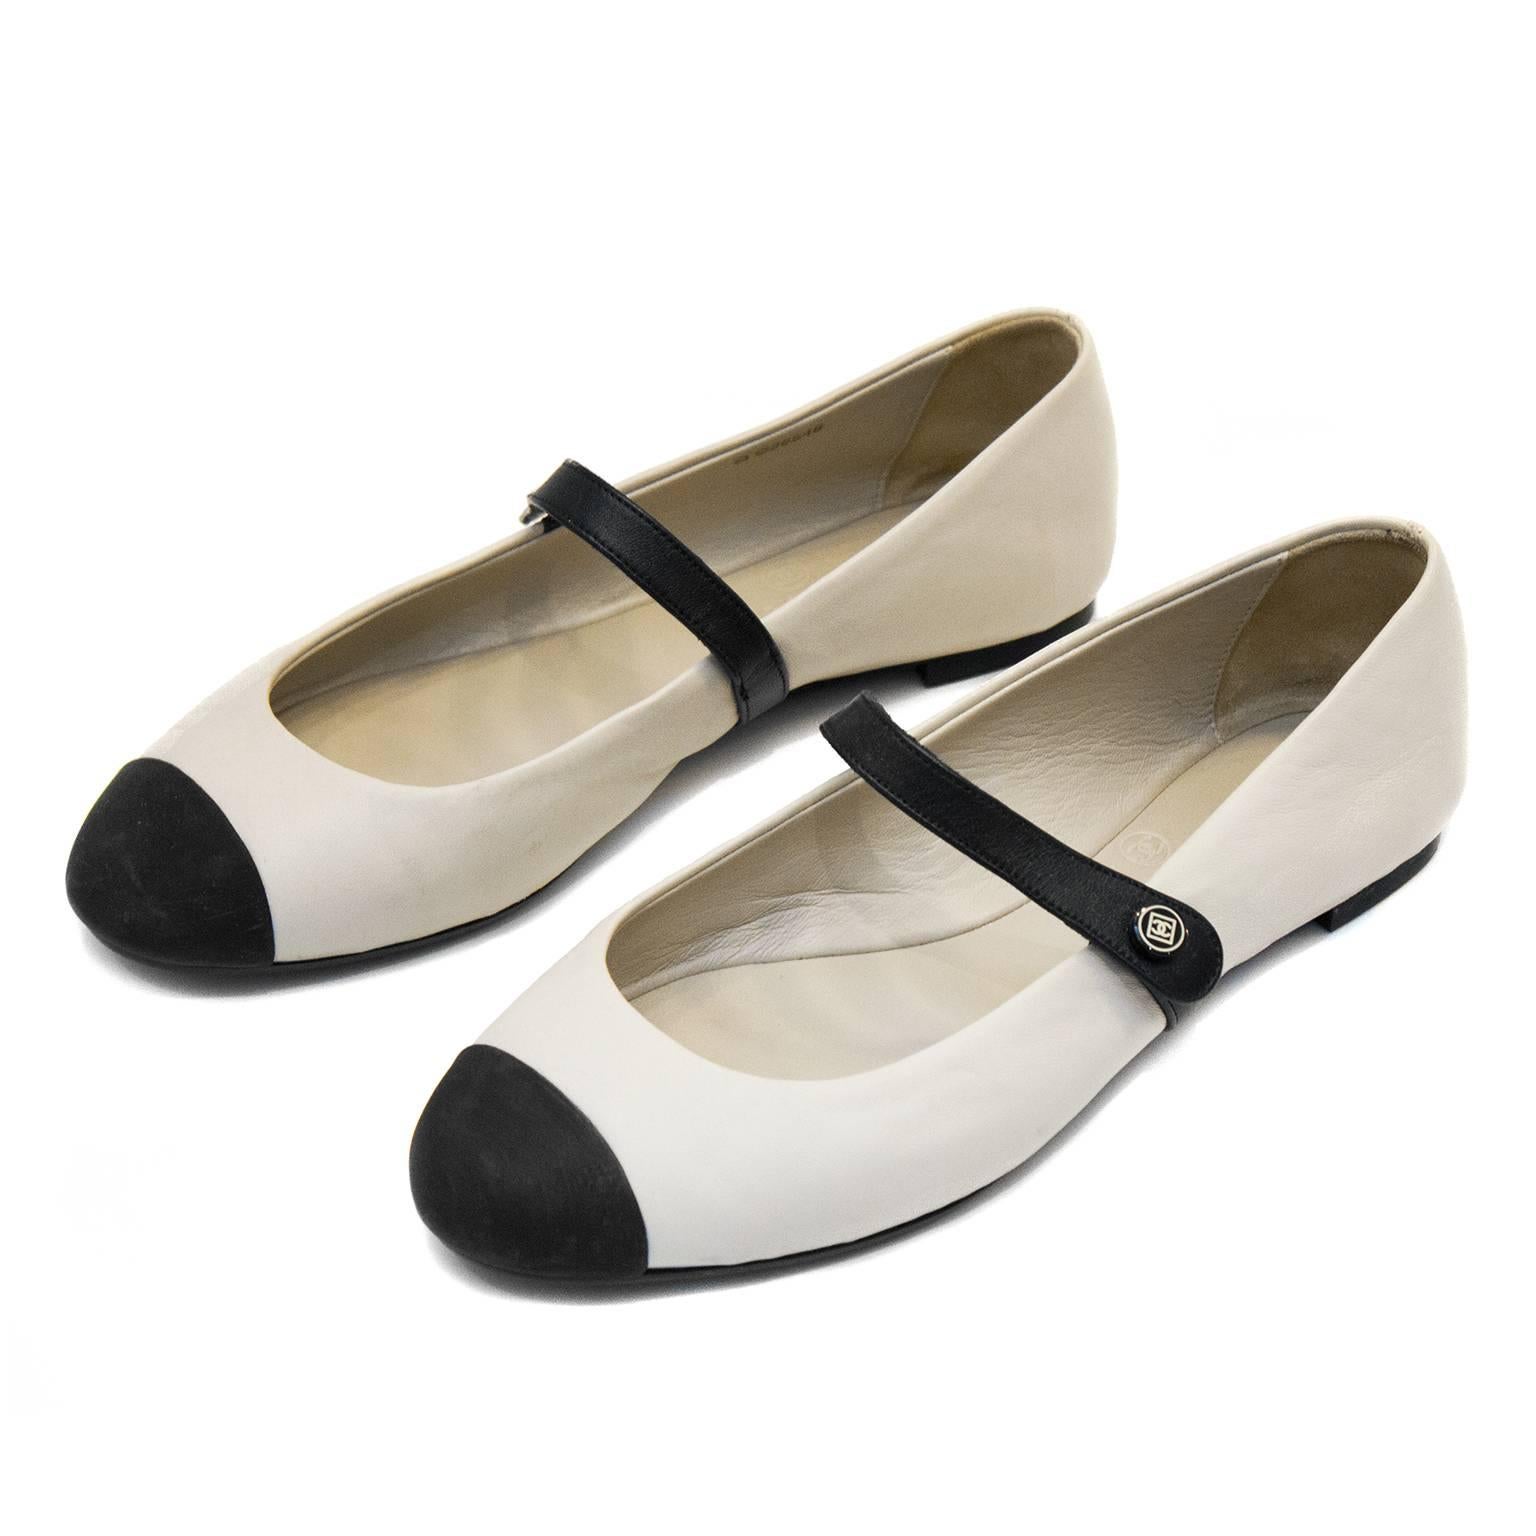 Chanel flat Mary Janes from the 2000's. Cream leather with black cap toe and strap. Chanel markings at heel and at strap button. Matching cream leather interior. Black rubber sole with Chanel markings, perfect for everyday wear. Excellent vintage